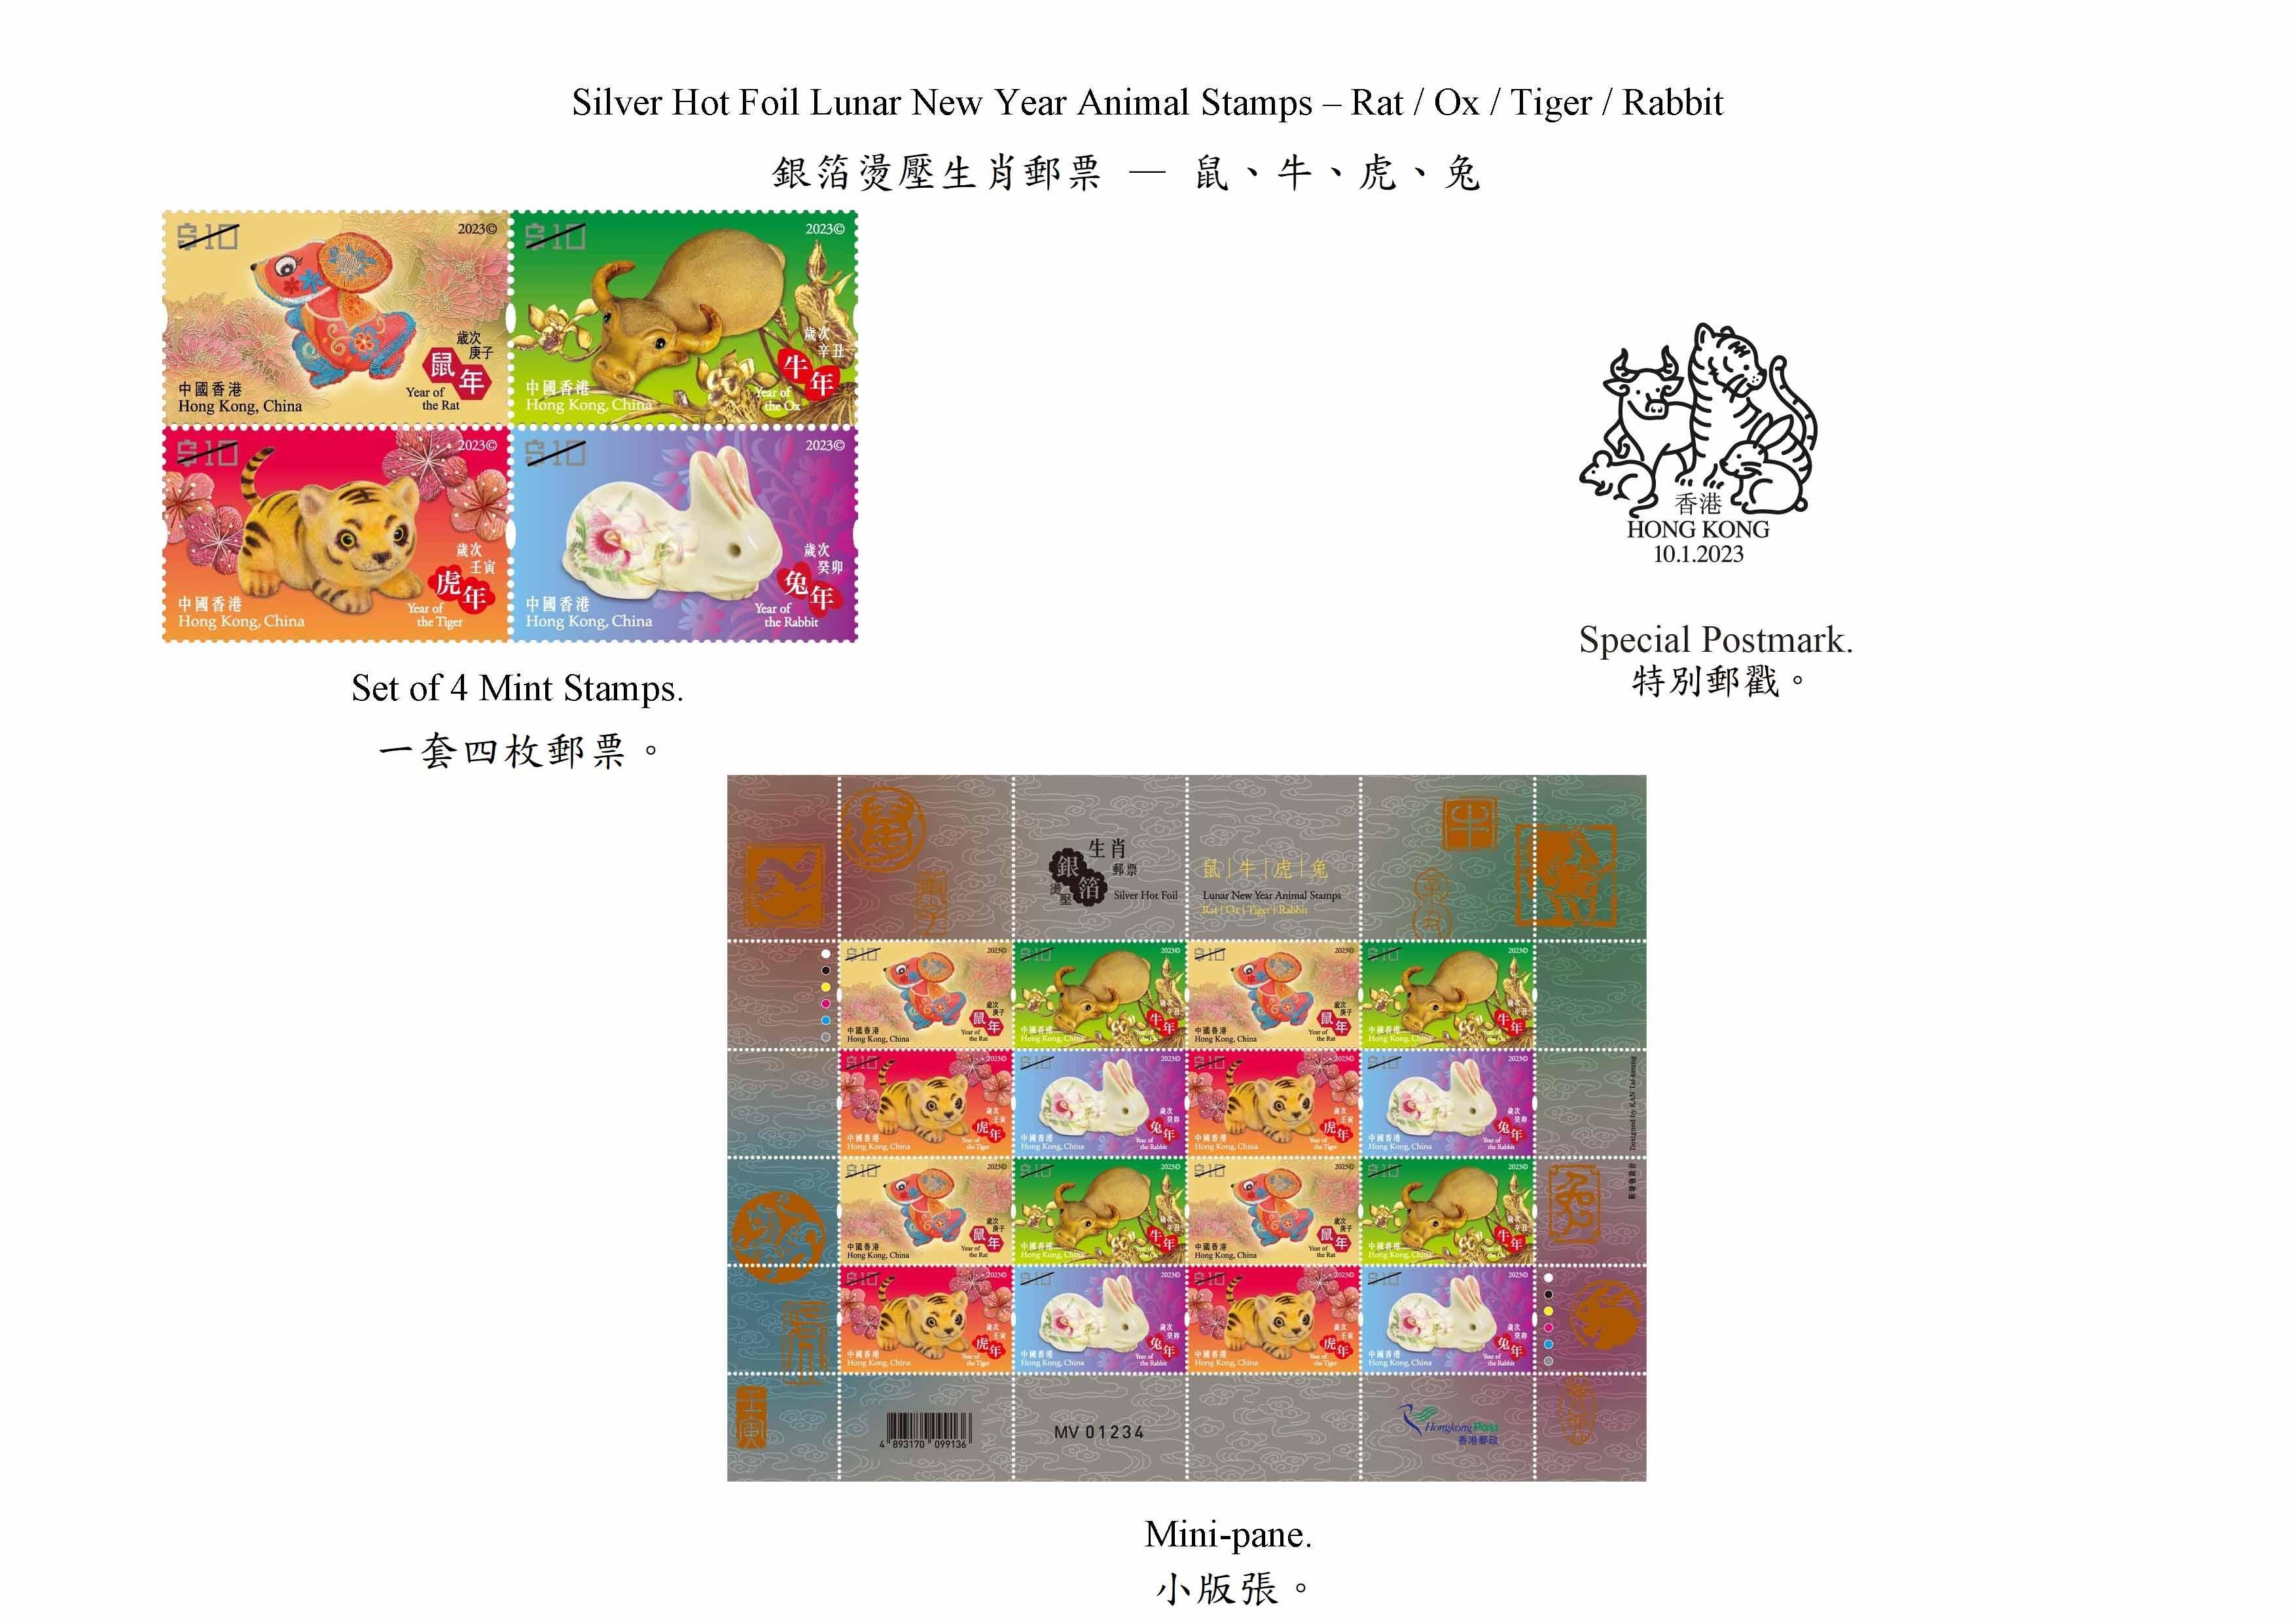 Hongkong Post will launch a special stamp issue and associated philatelic products with the theme "Year of the Rabbit" on January 10, 2023 (Tuesday). The "Silver Hot Foil Lunar New Year Animal Stamps - Rat/Ox/Tiger/Rabbit" will also be launched on the same day. Photo shows the mint stamps, the mini-pane and the special postmark.


